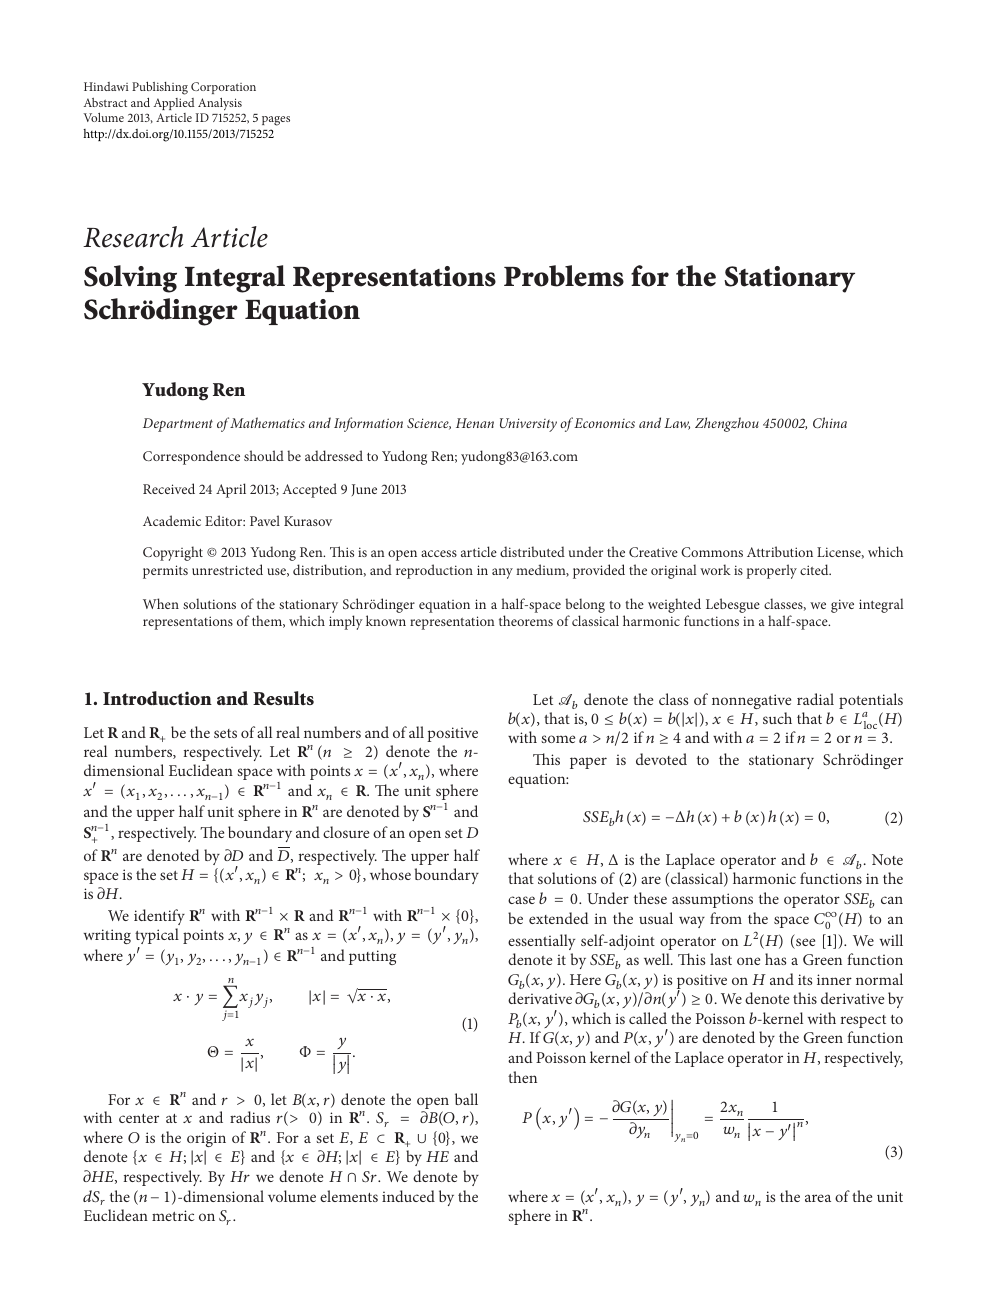 Solving Integral Representations Problems For The Stationary Schrodinger Equation Topic Of Research Paper In Mathematics Download Scholarly Article Pdf And Read For Free On Cyberleninka Open Science Hub